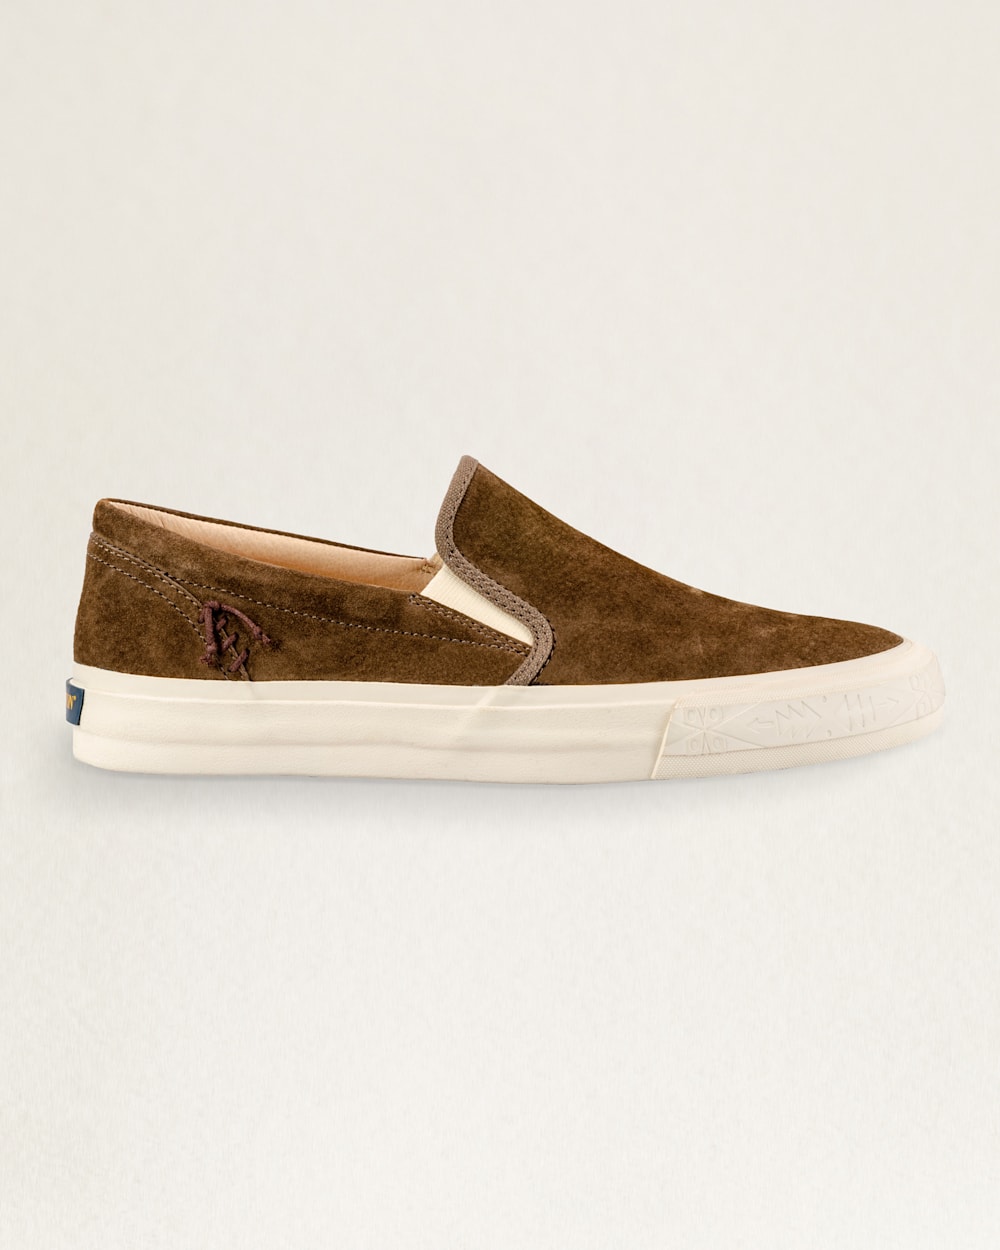 ALTERNATE VIEW OF MEN'S SUEDE SLIP-ON SHOES IN BROWN image number 3